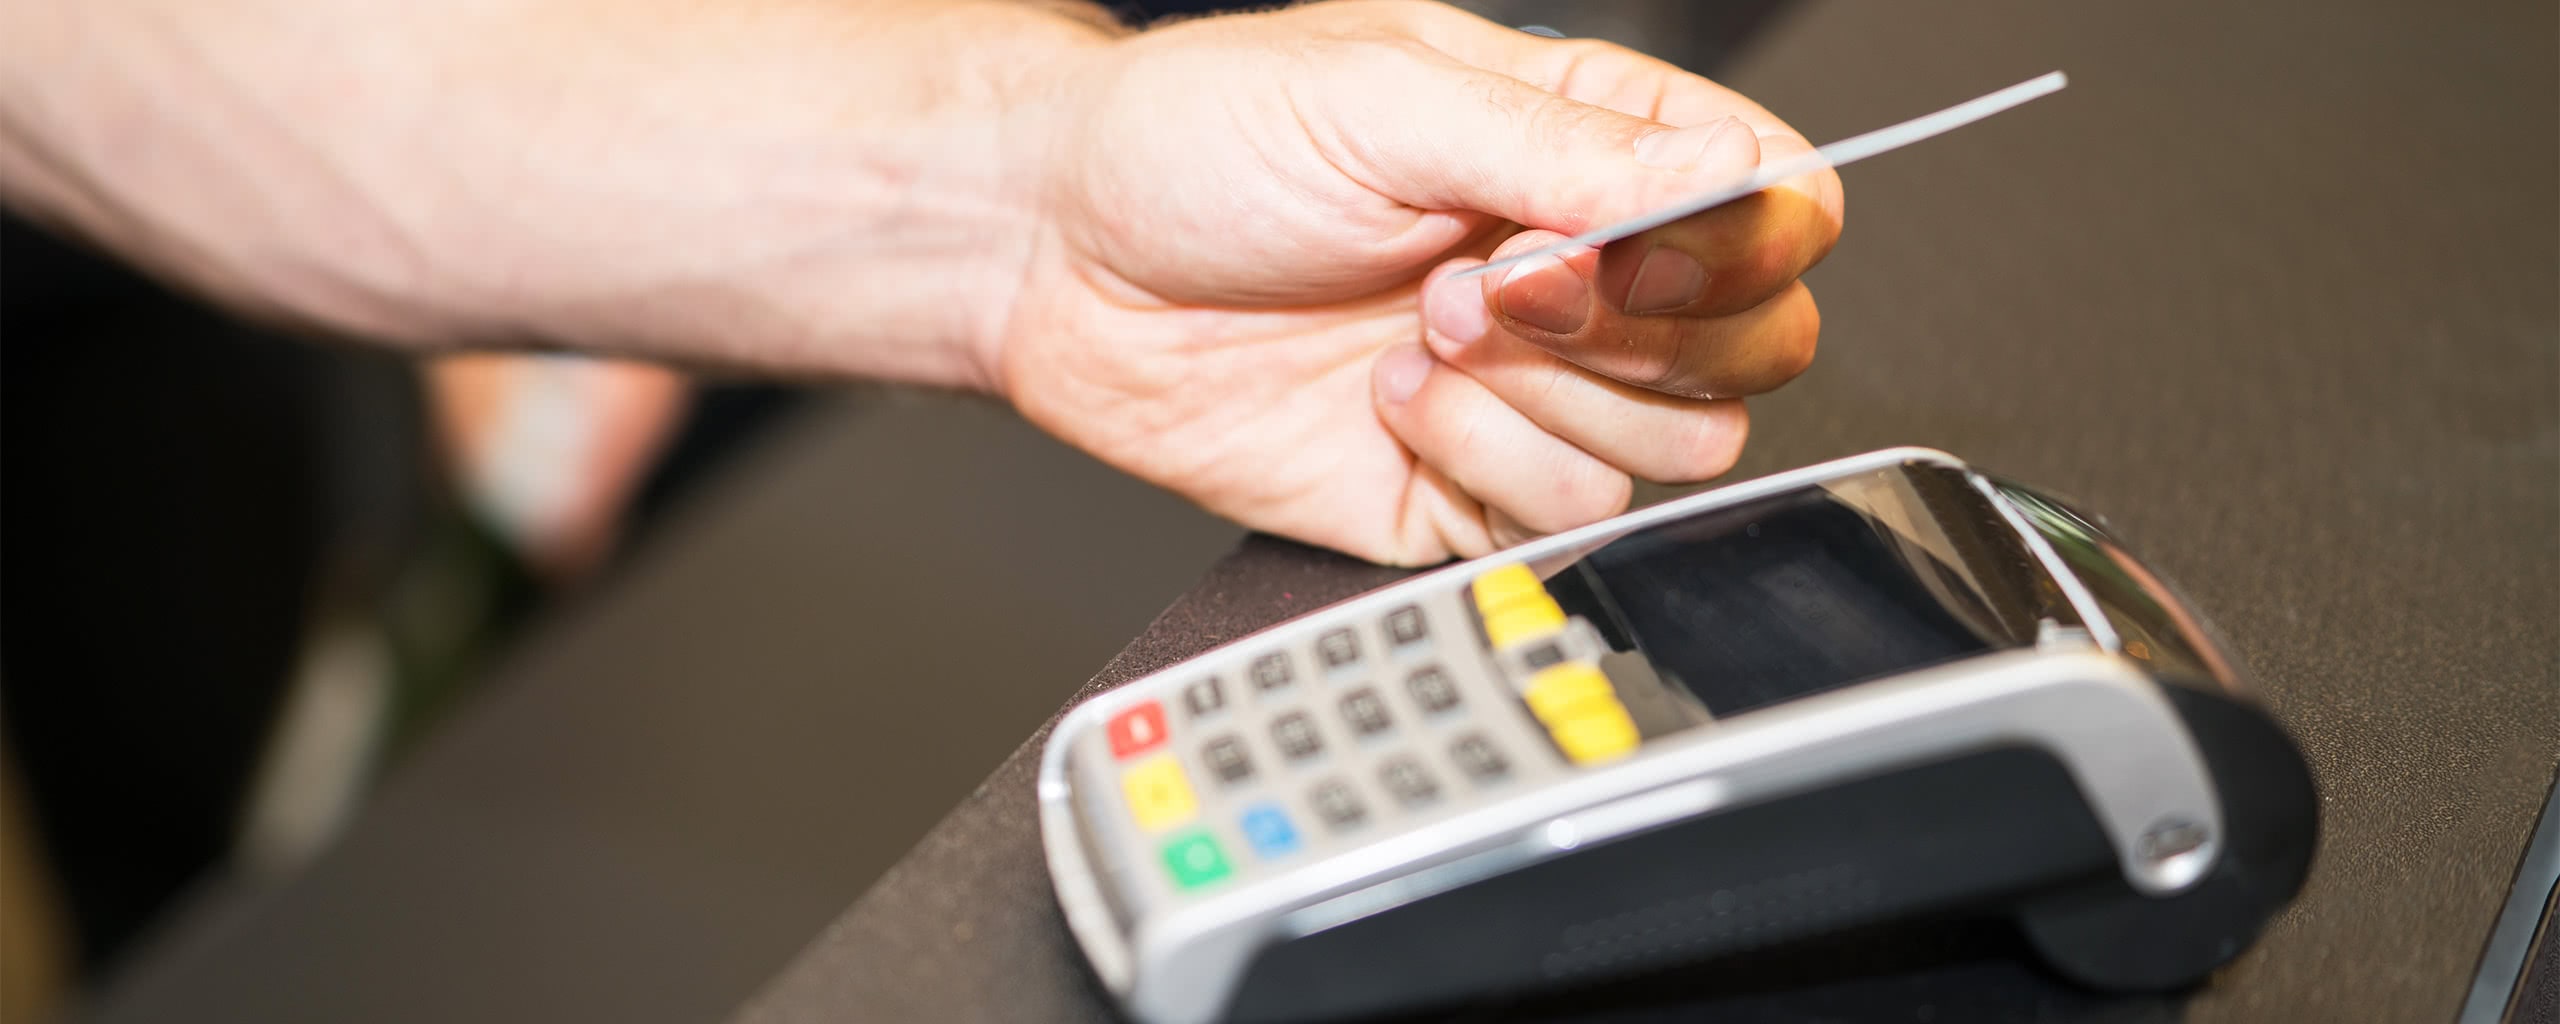 paying with a card on a POS terminal